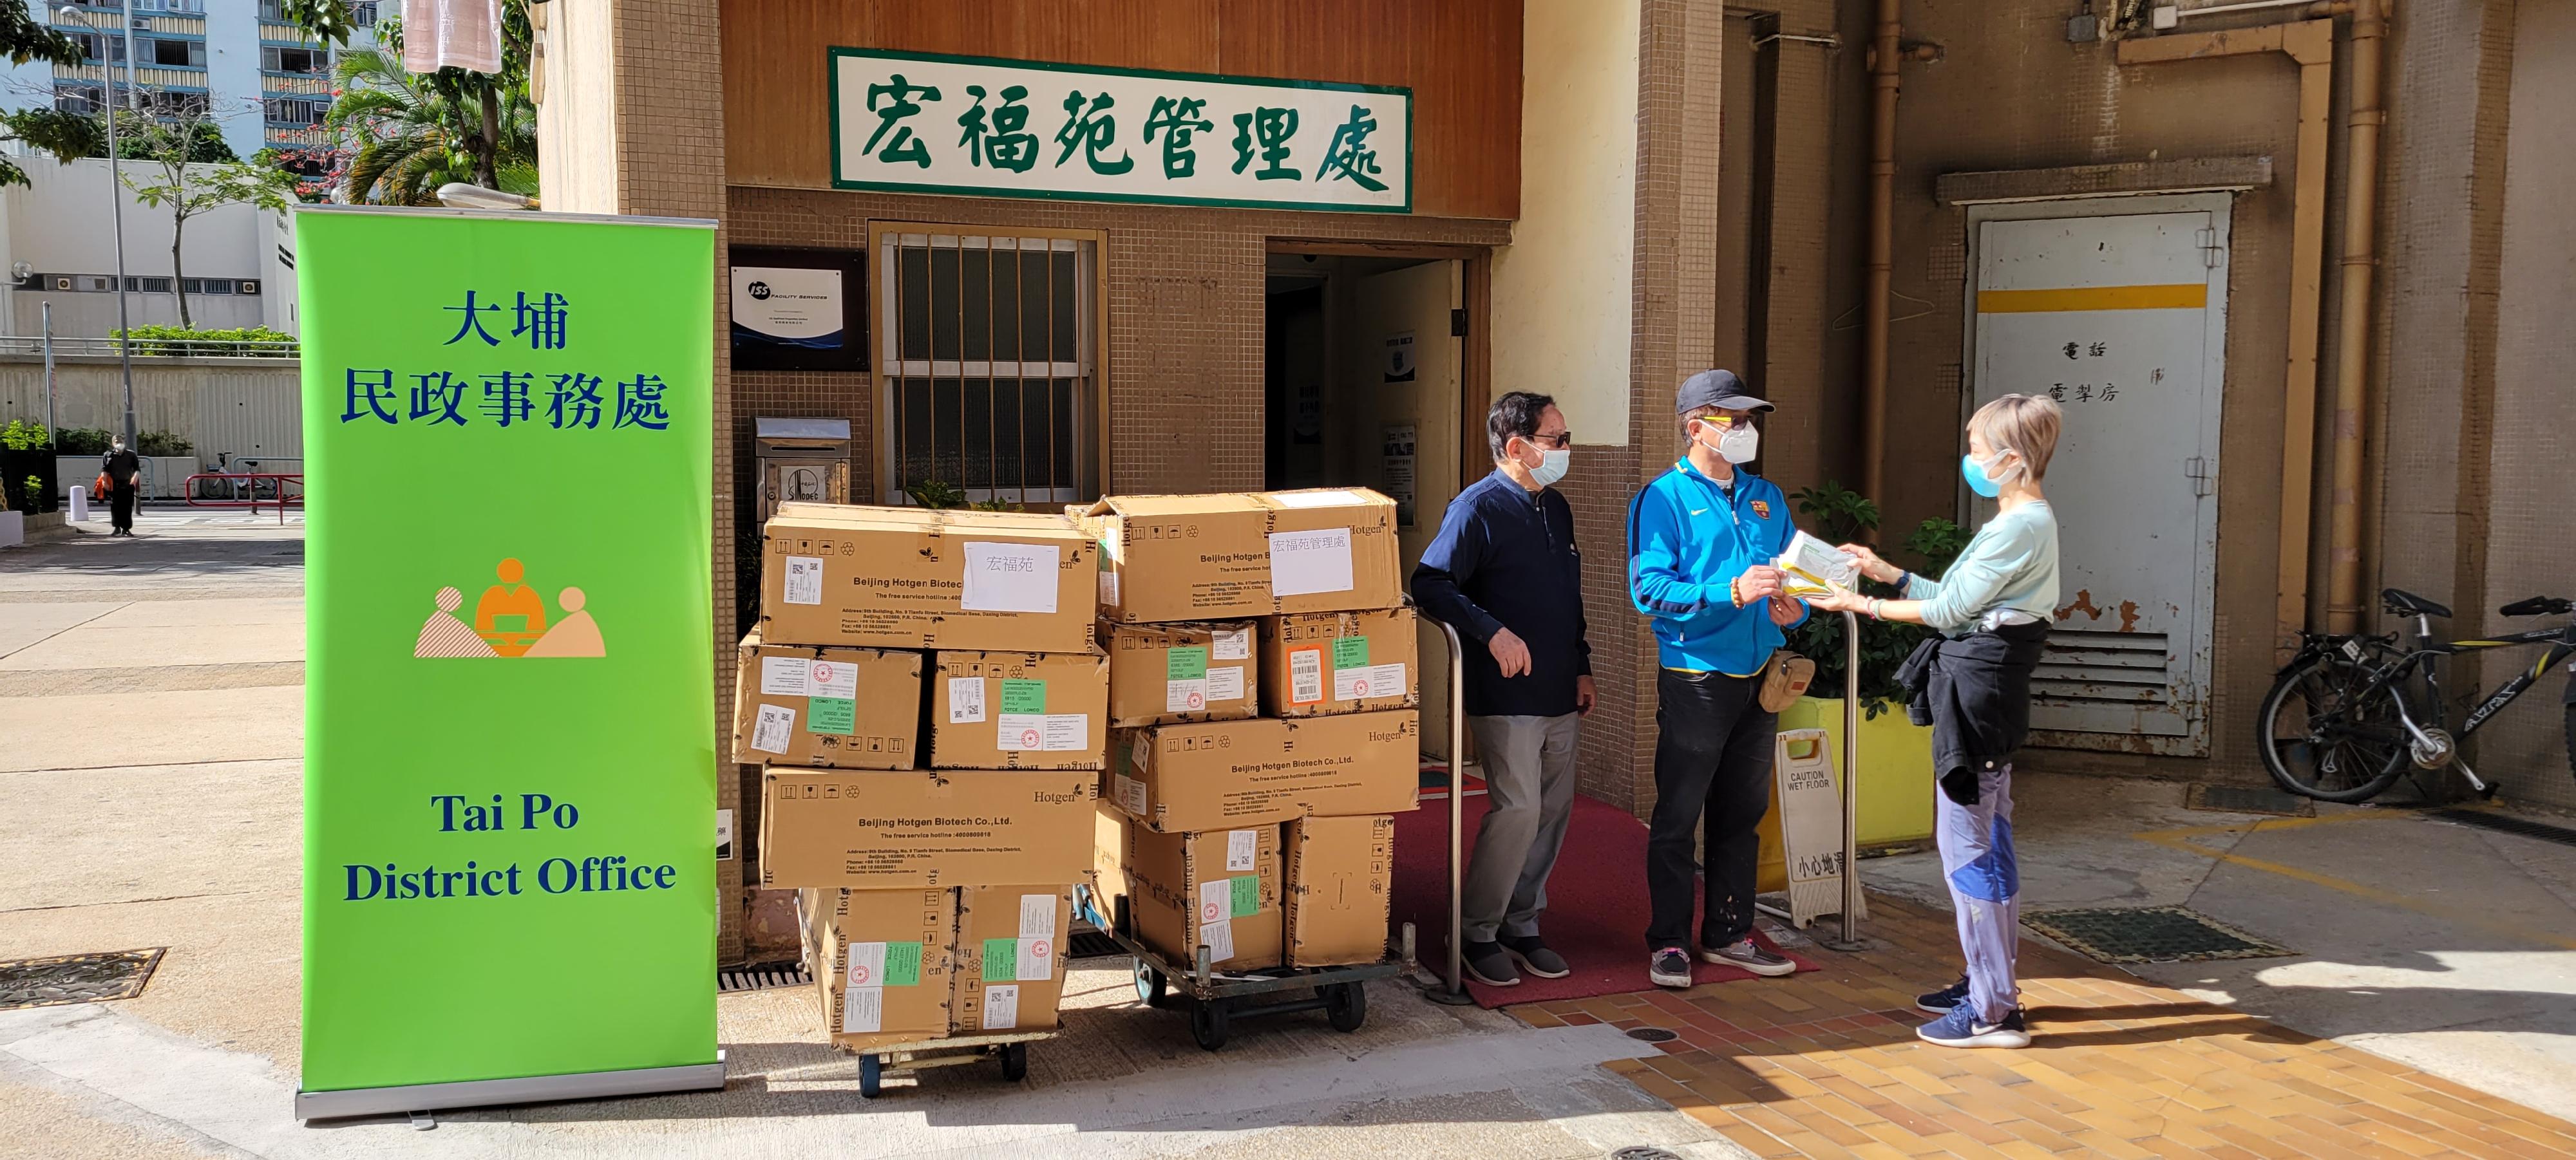 The Tai Po District Office distributed COVID-19 rapid test kits to households, cleansing workers and property management staff living and working in Wang Fuk Court for voluntary testing through the property management company.